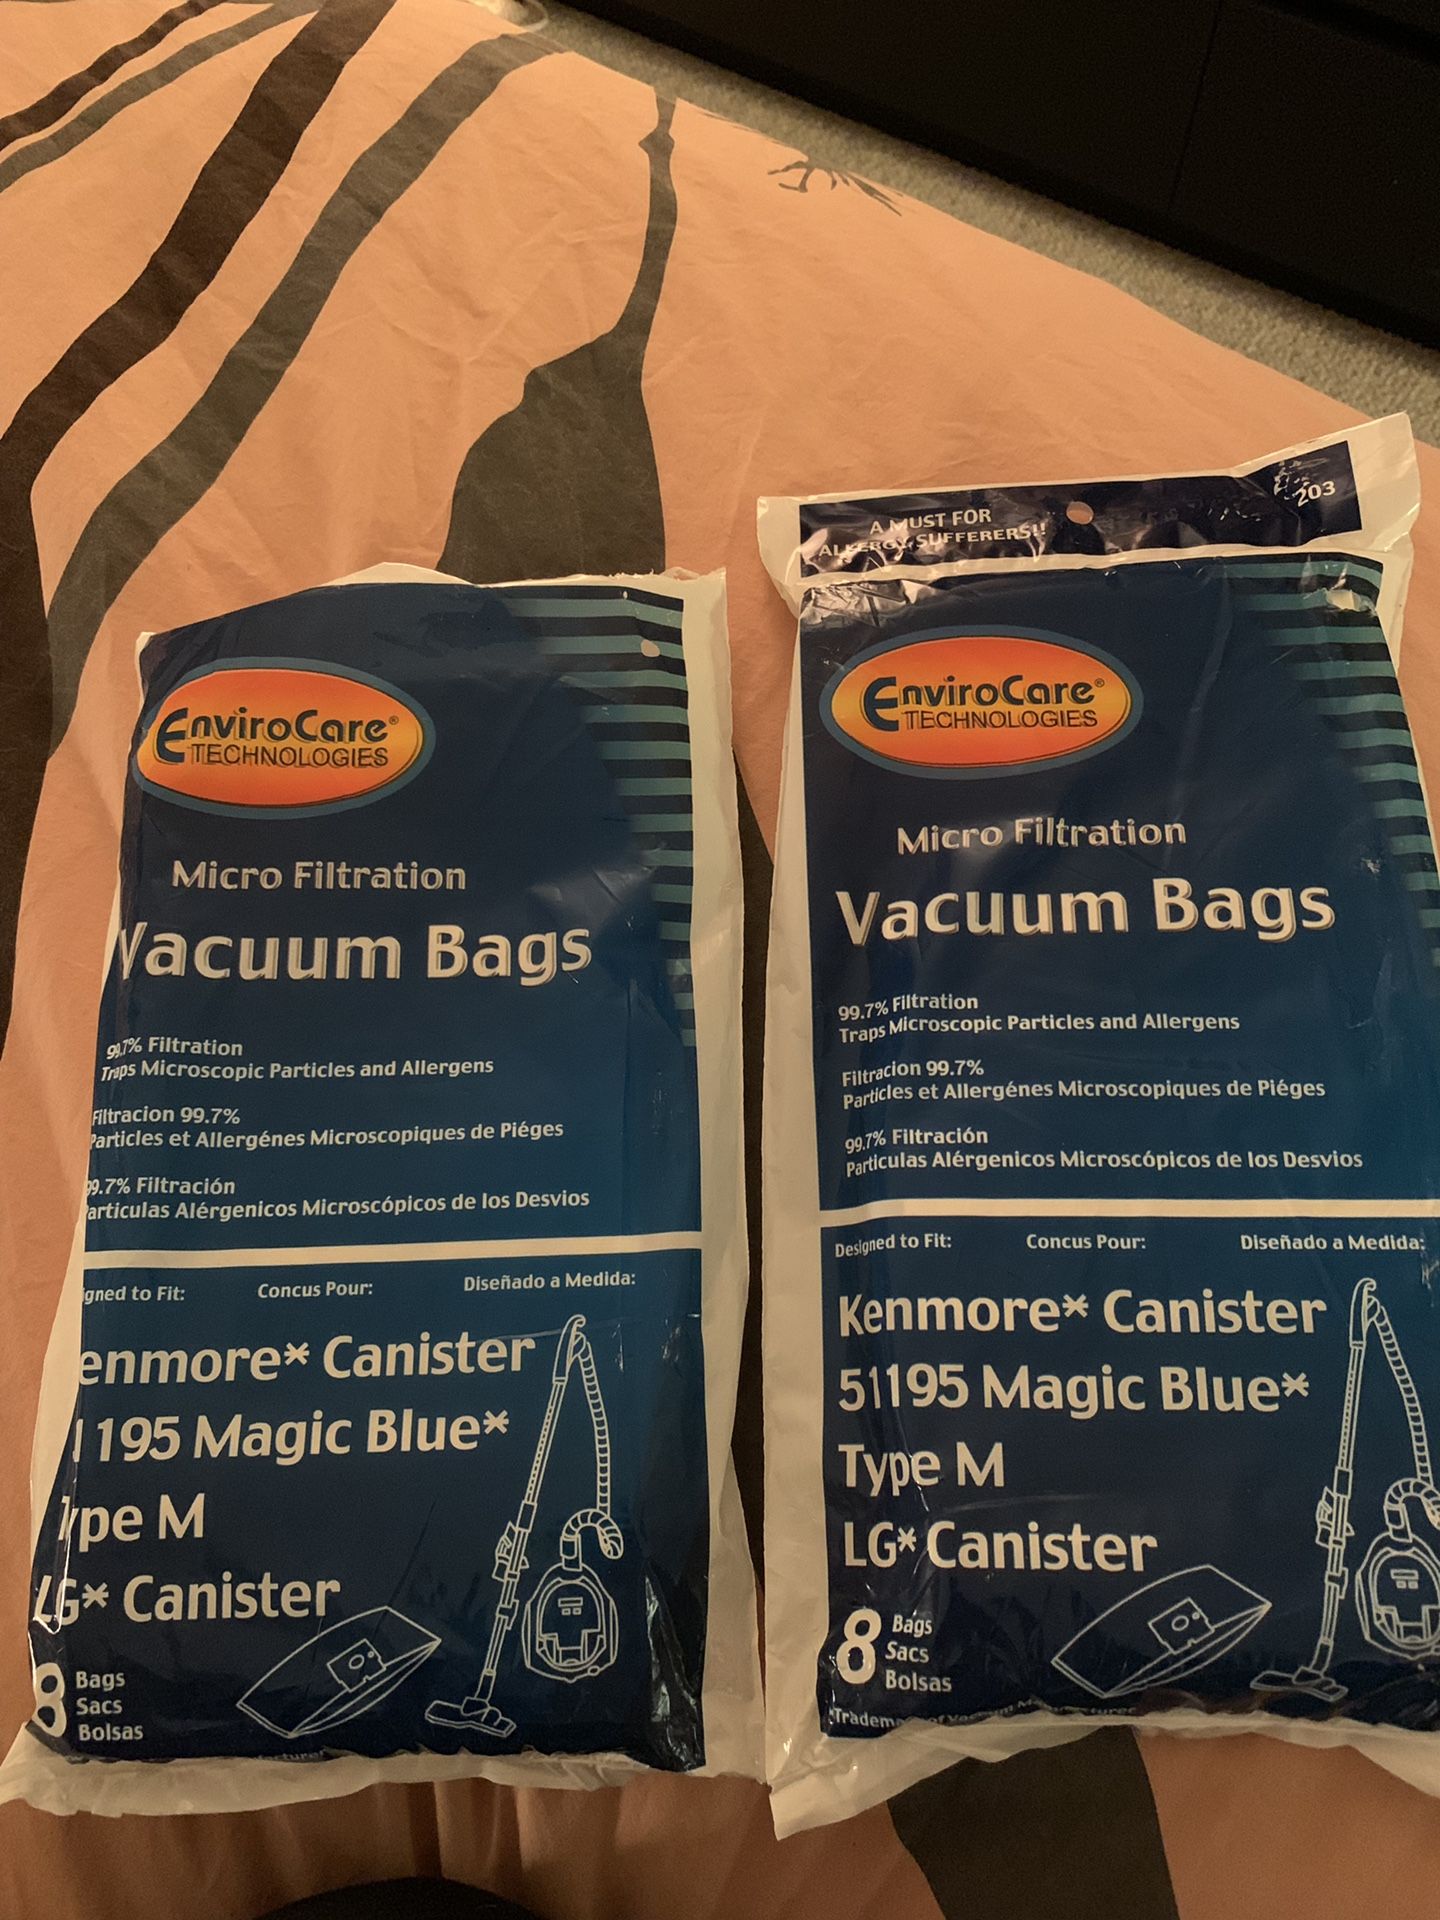 Vacuum bags for Kenmore canister and LG Canister